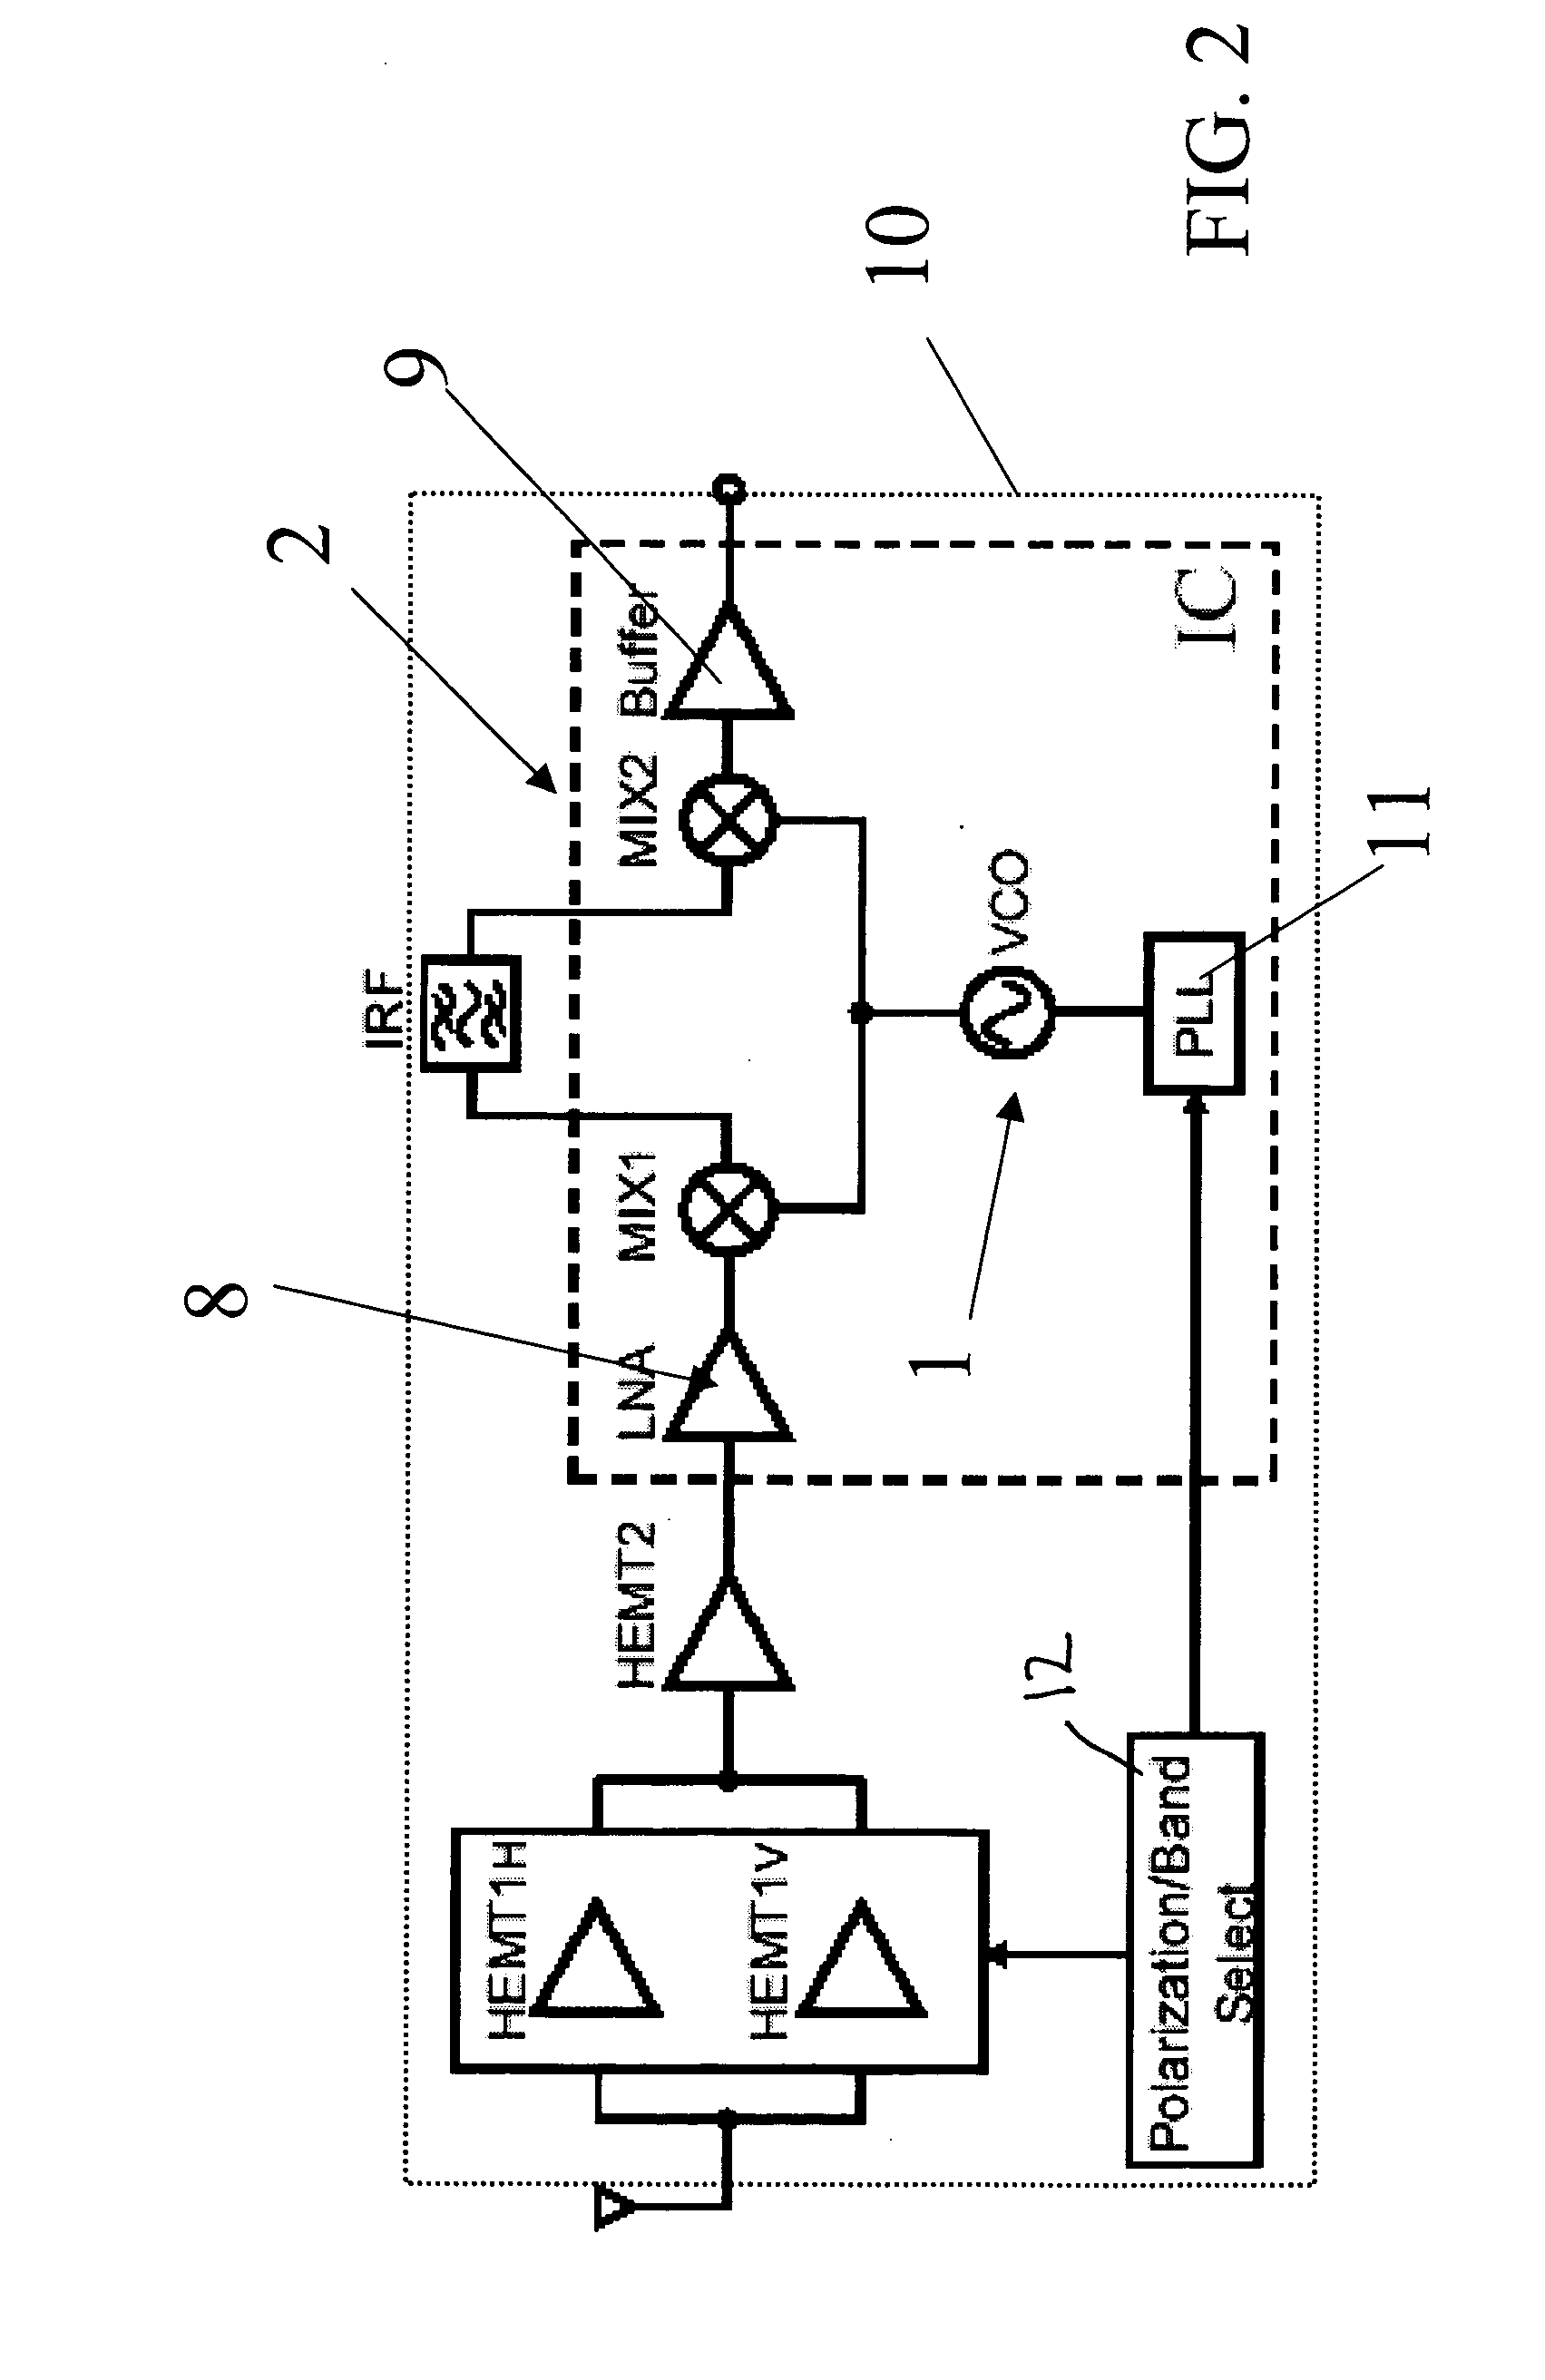 Transformer-based VCO for both phase noise and tuning range improvement in bipolar technology